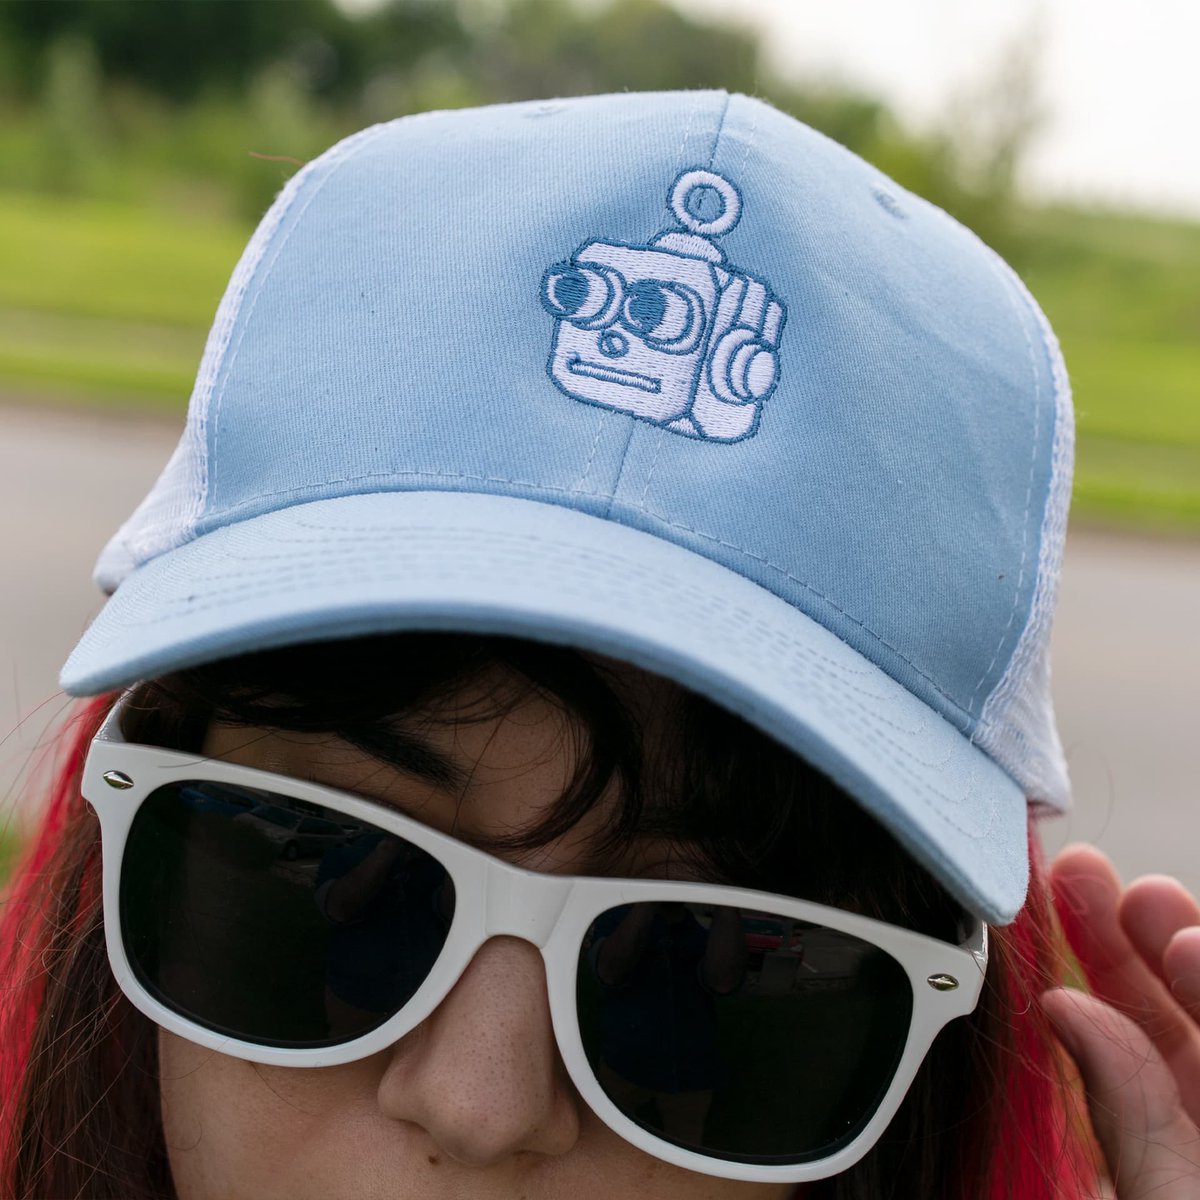 Trucker hats and shades now available for summer in our merch store. Get yours today. thegetupkids.merchtable.com